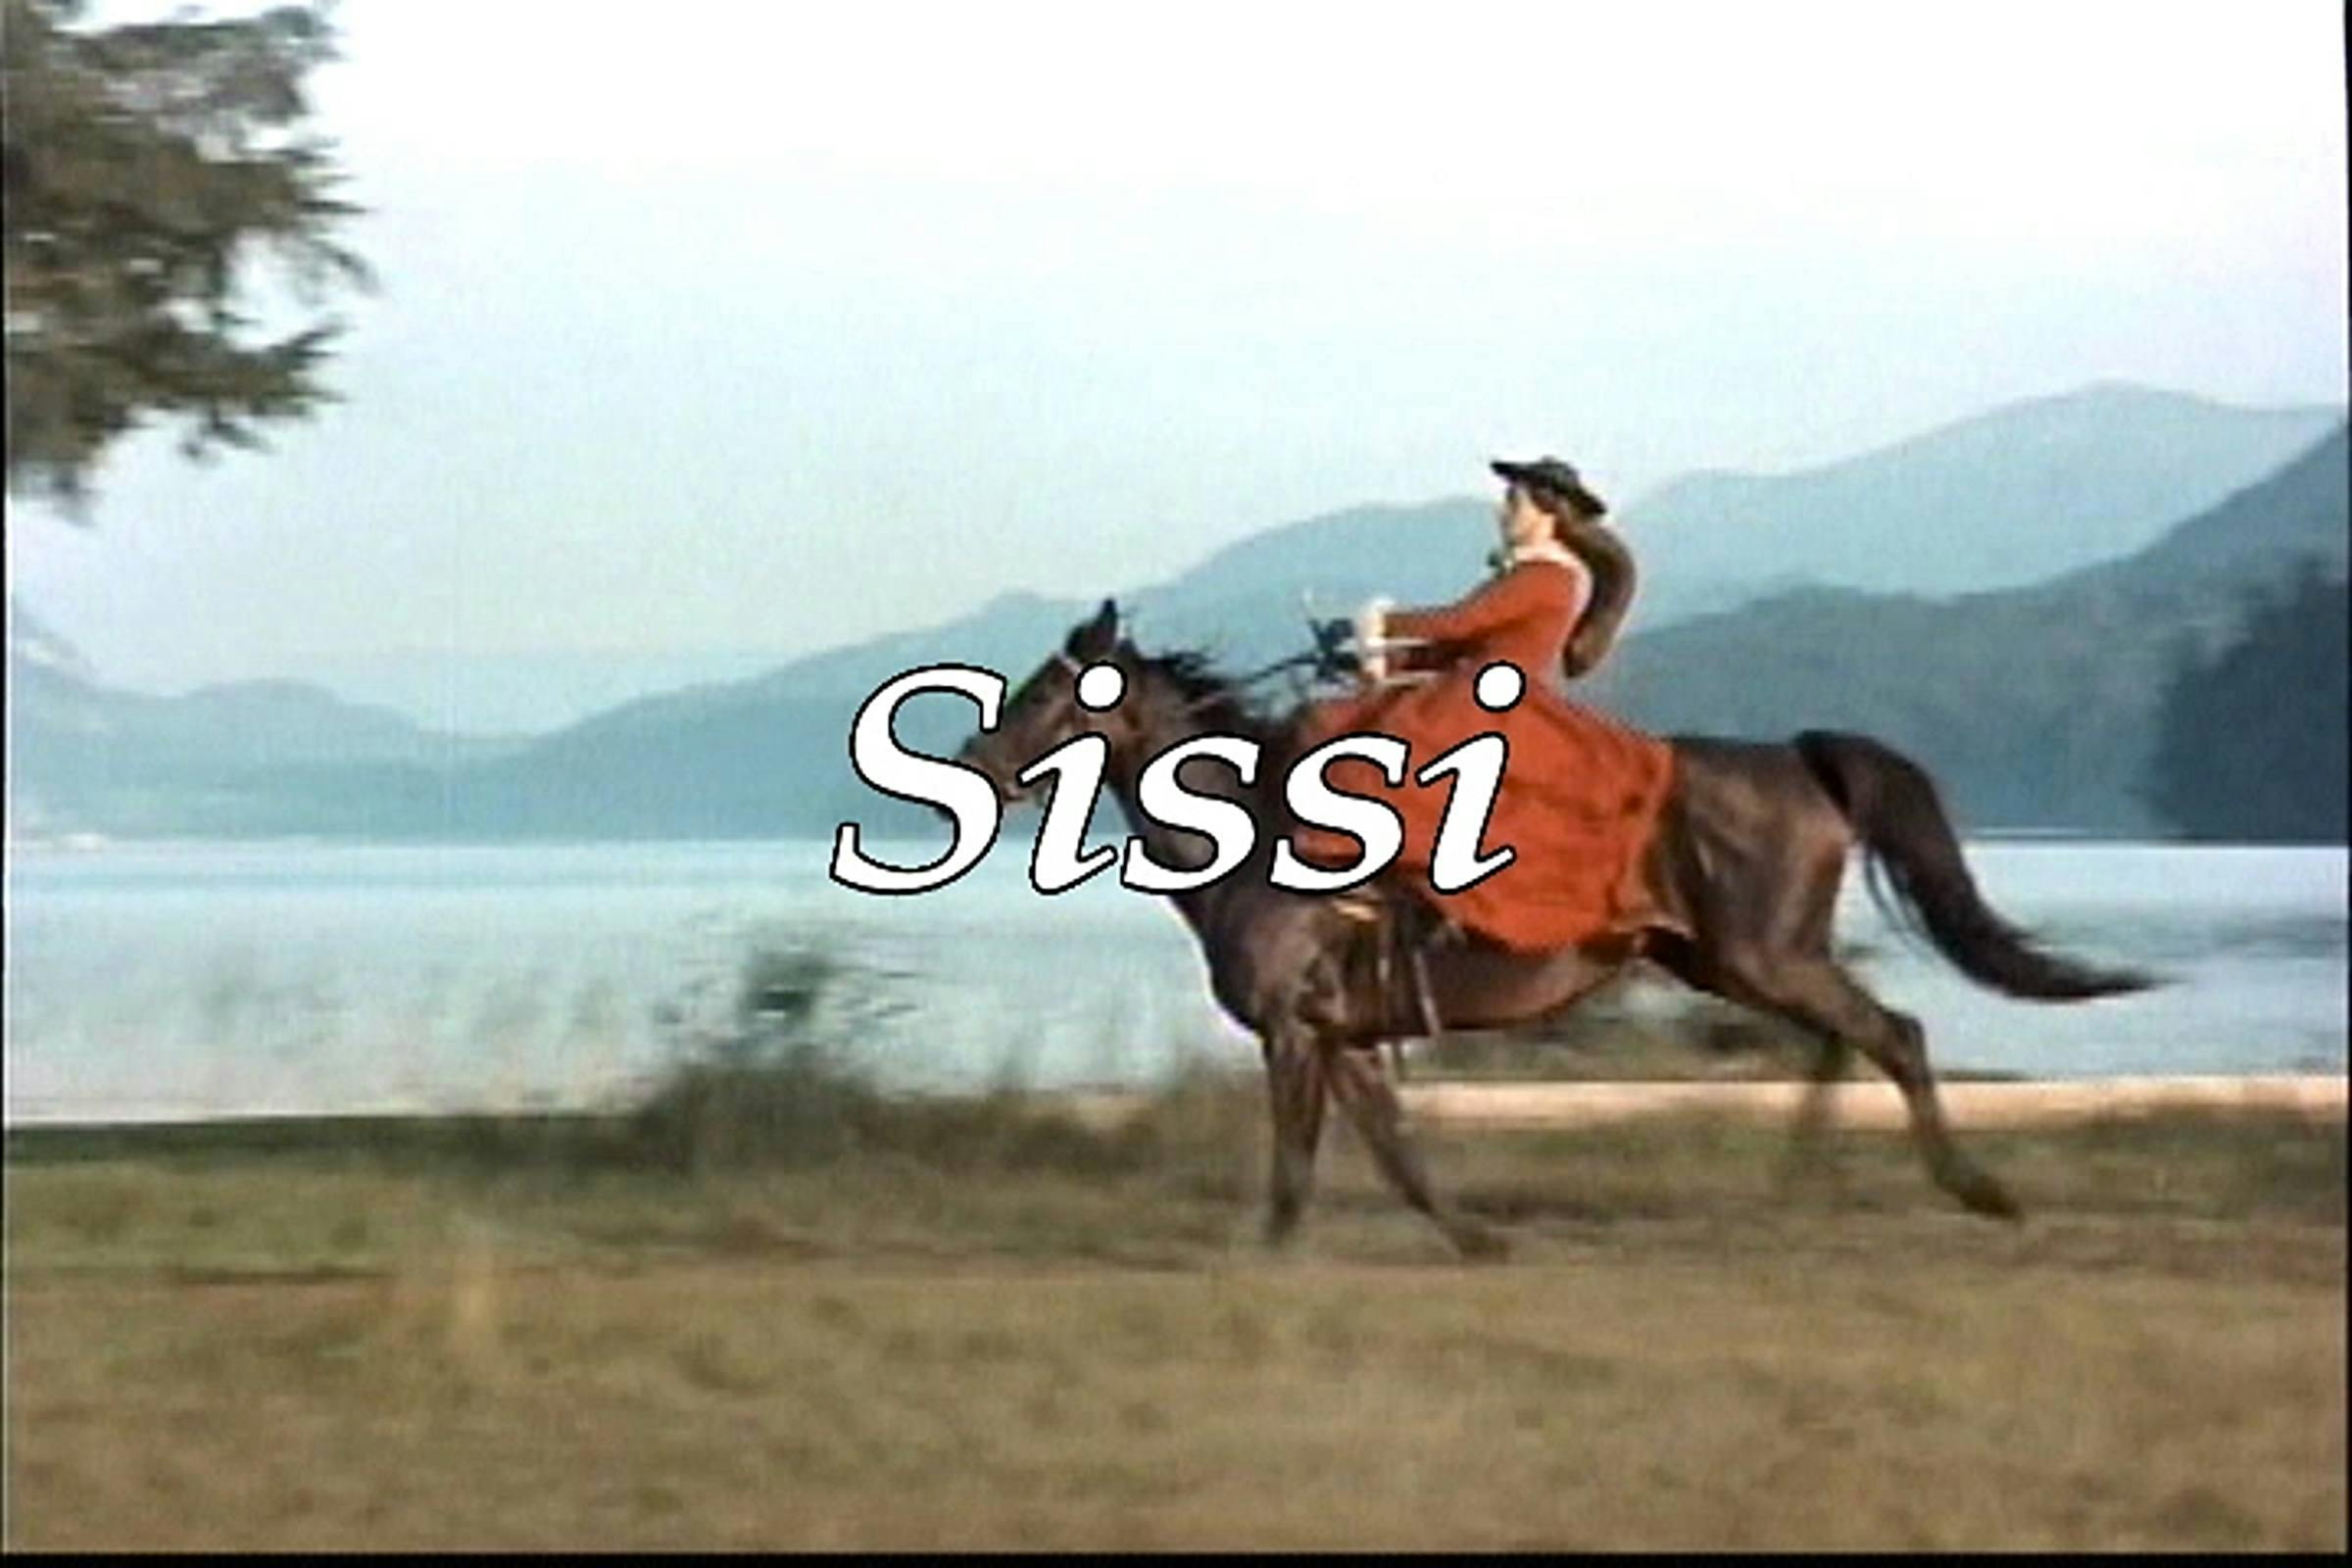 Image of someone wearing a red dress riding a horse across a grassy space. The word 'Sissi' is superimposed on top of the image.